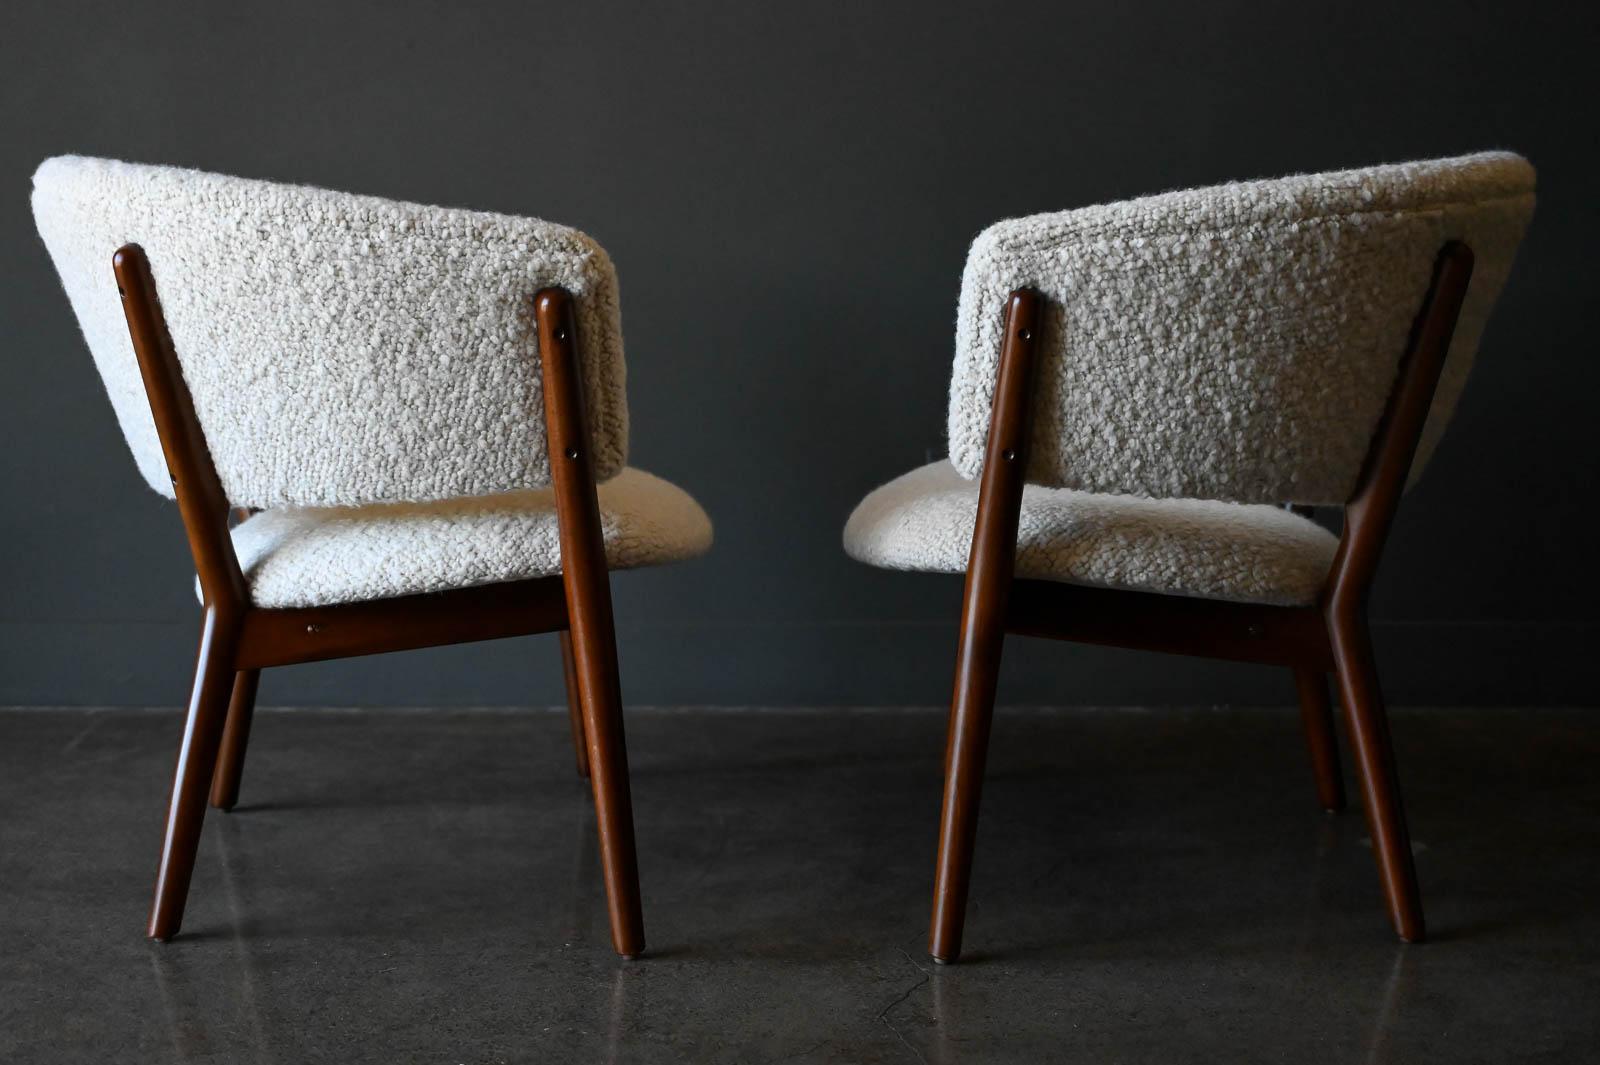 Pair of Nanna Ditzel Model 83 Lounge Chairs in Pierre Frey Wool Bouclé, 1952 For Sale 1